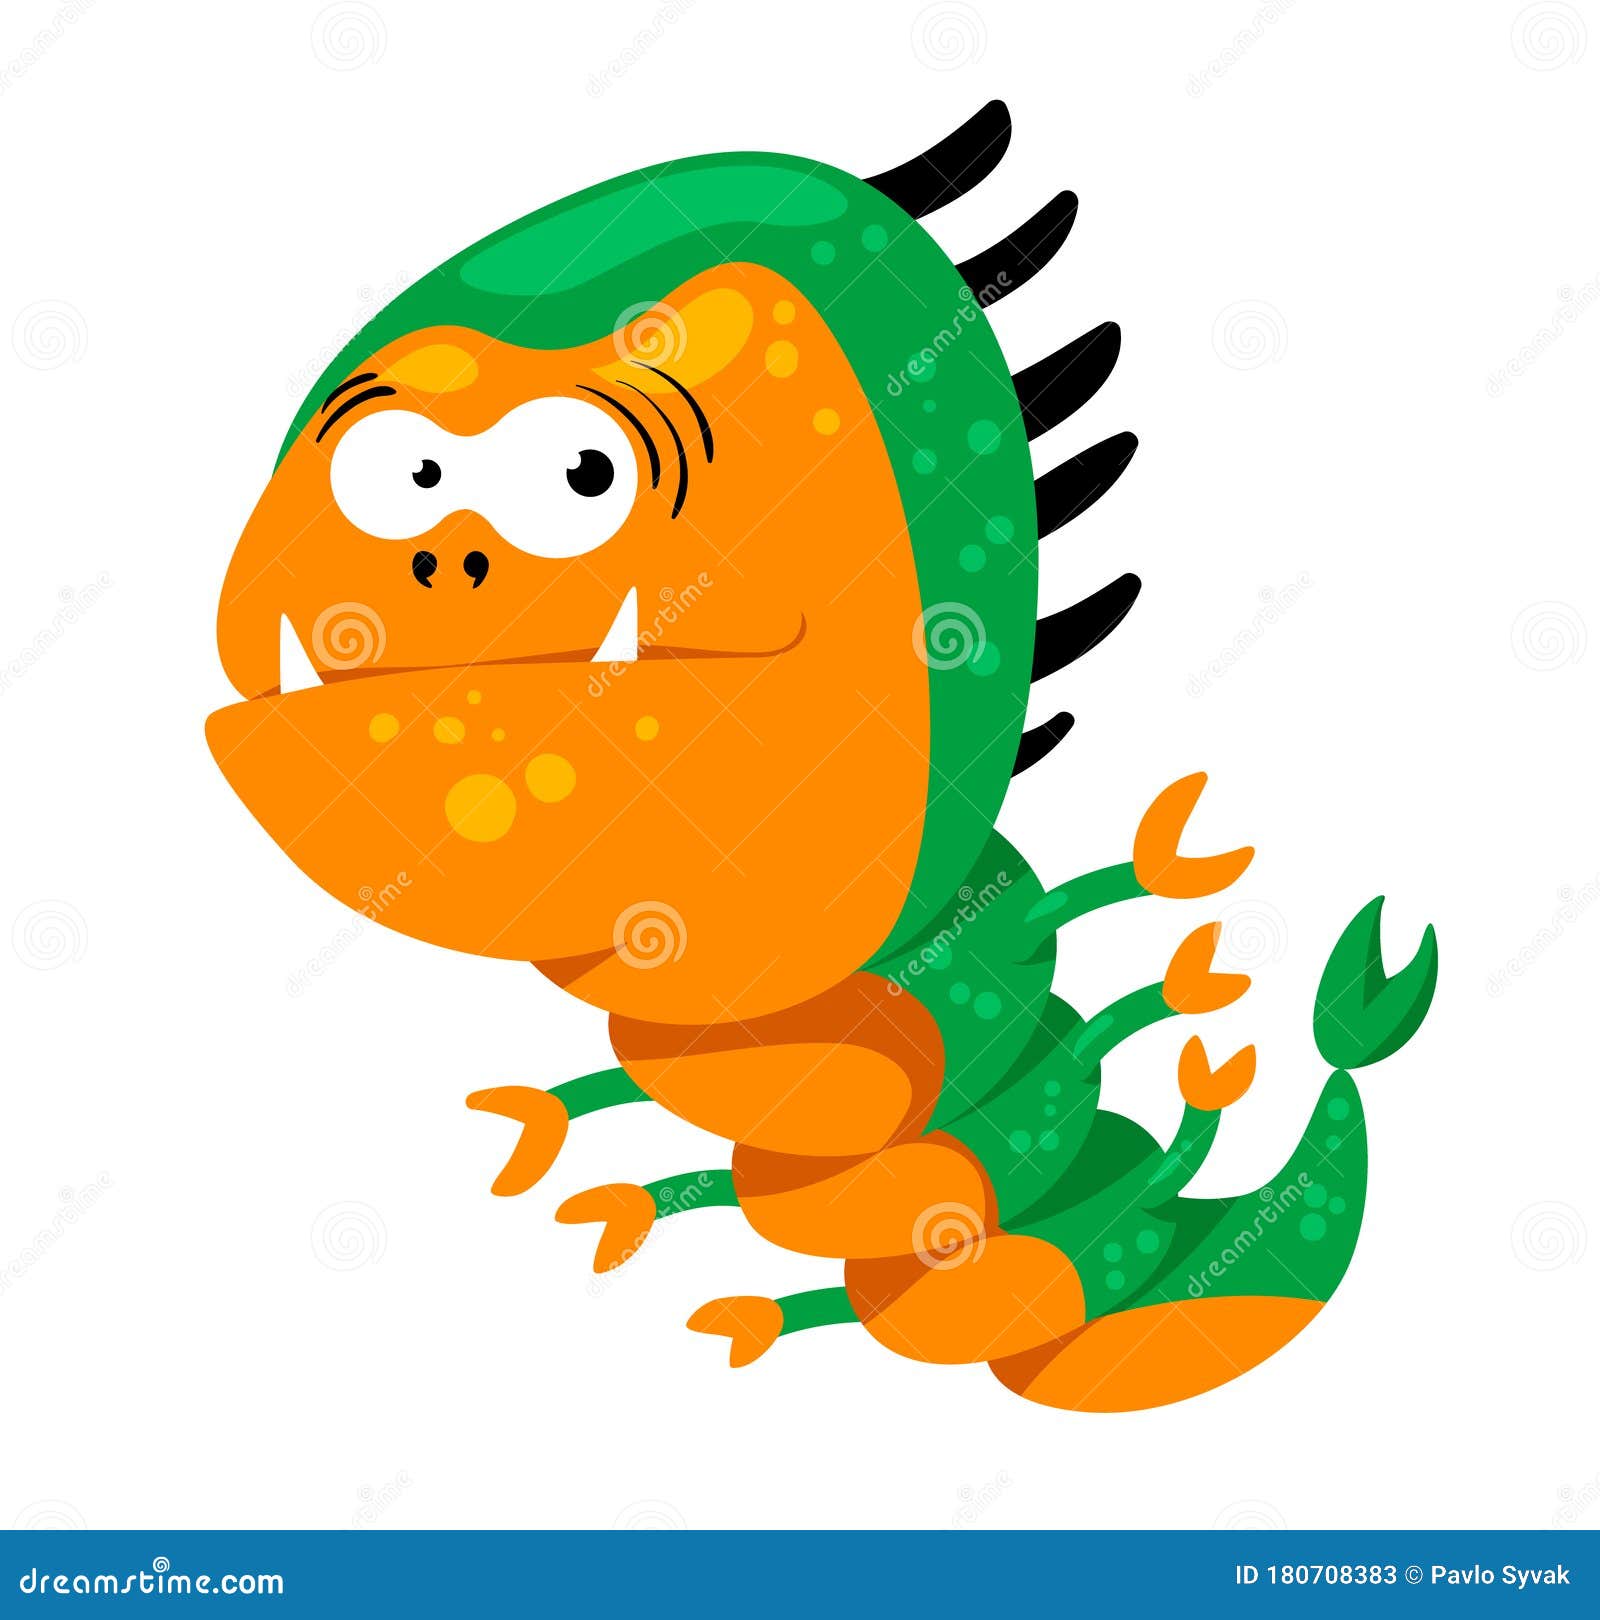 https://thumbs.dreamstime.com/z/cute-monster-funny-face-fangs-many-feet-claws-worm-germ-alien-bacteria-long-body-cute-monster-funny-180708383.jpg